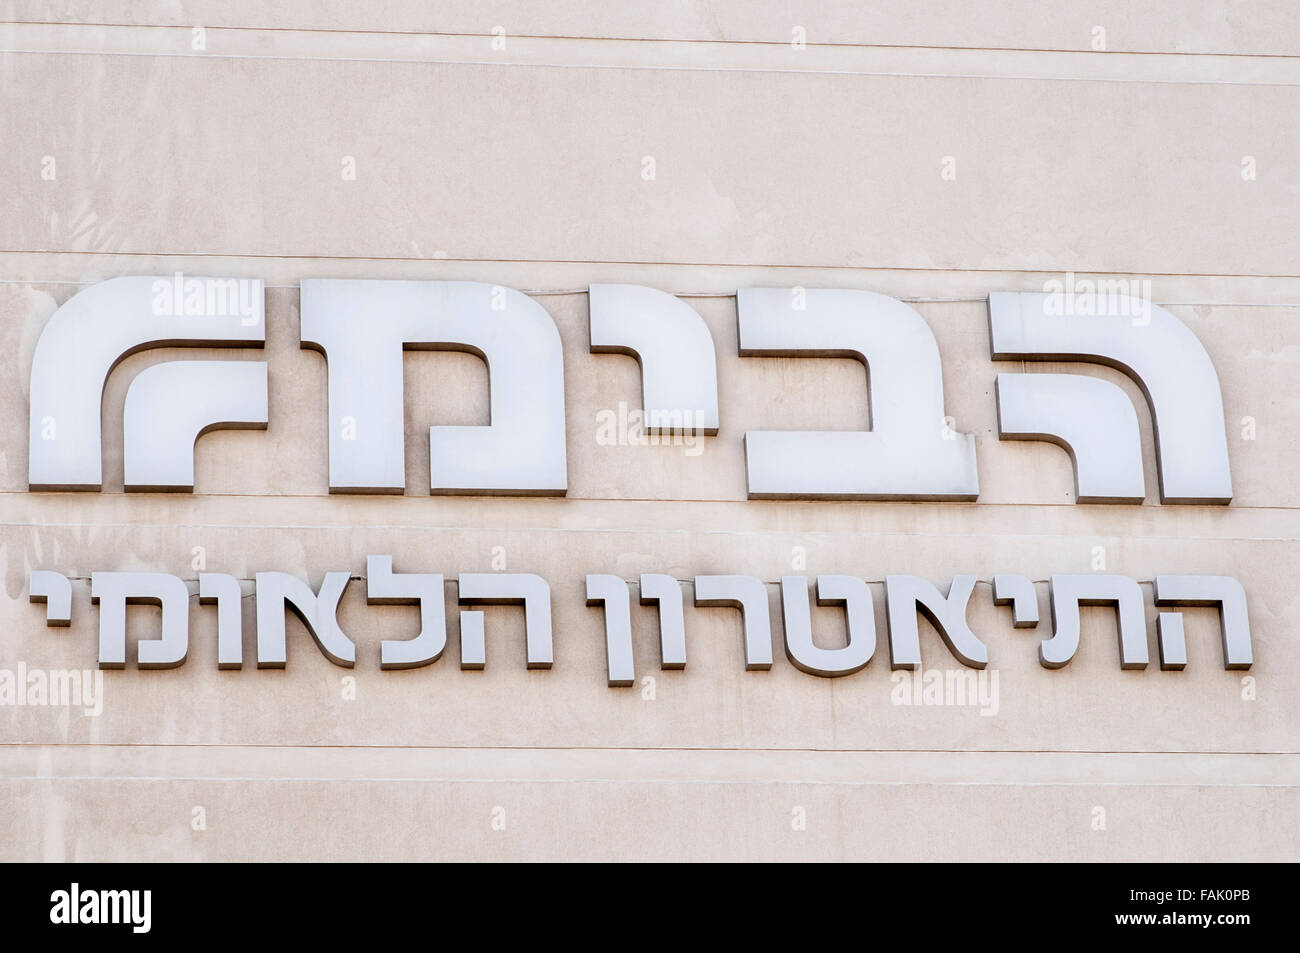 Israel, Tel Aviv The recently reconstructed building of Habimah, Israel's National Theatre Stock Photo